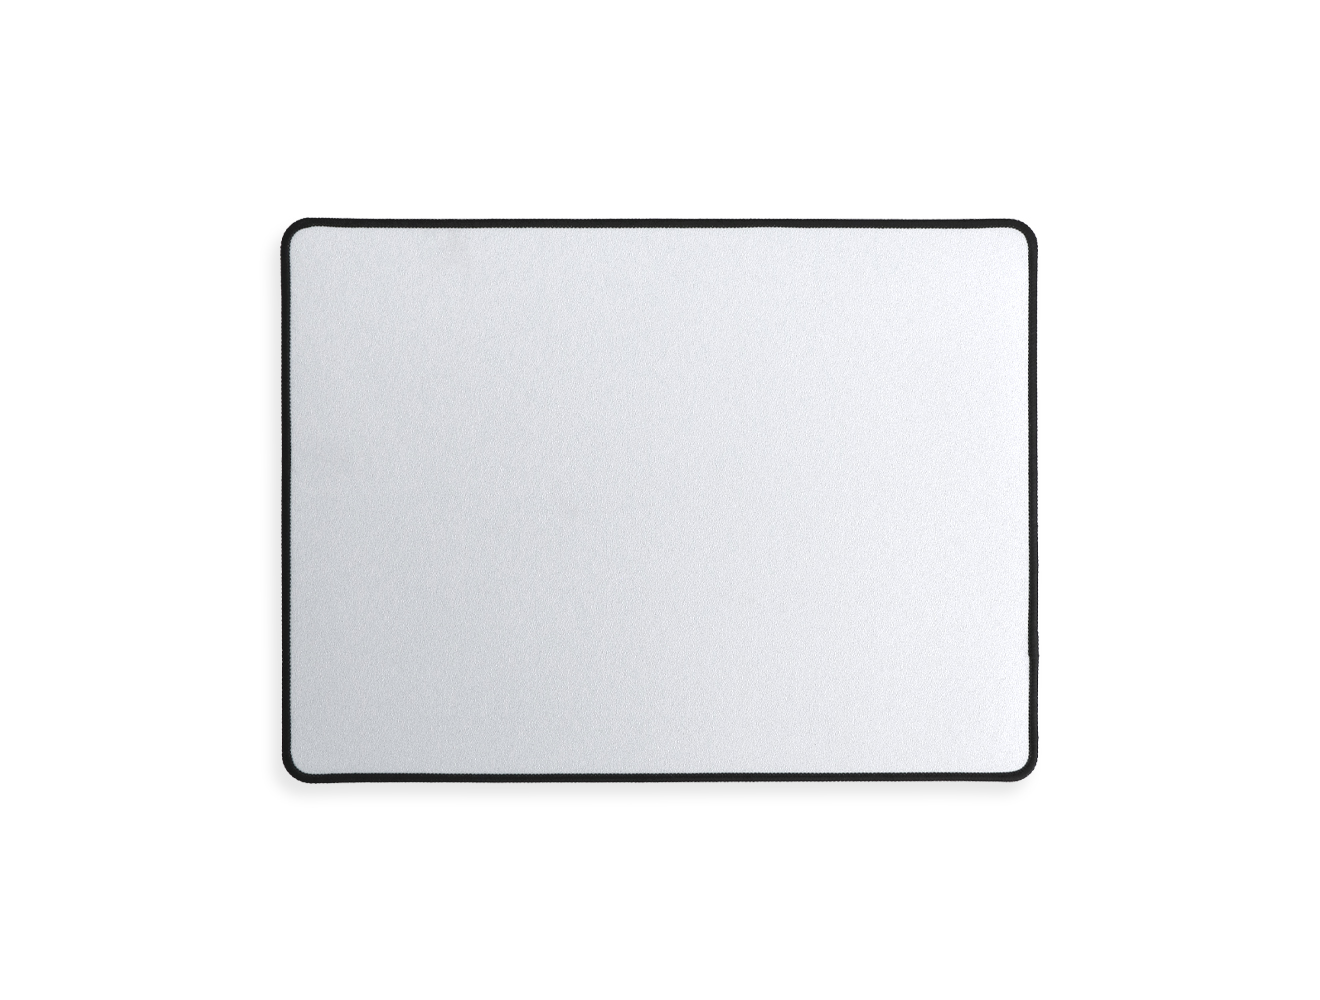 Sublimation Gaming Mouse Pad 400 x 300 x 3 mm - White